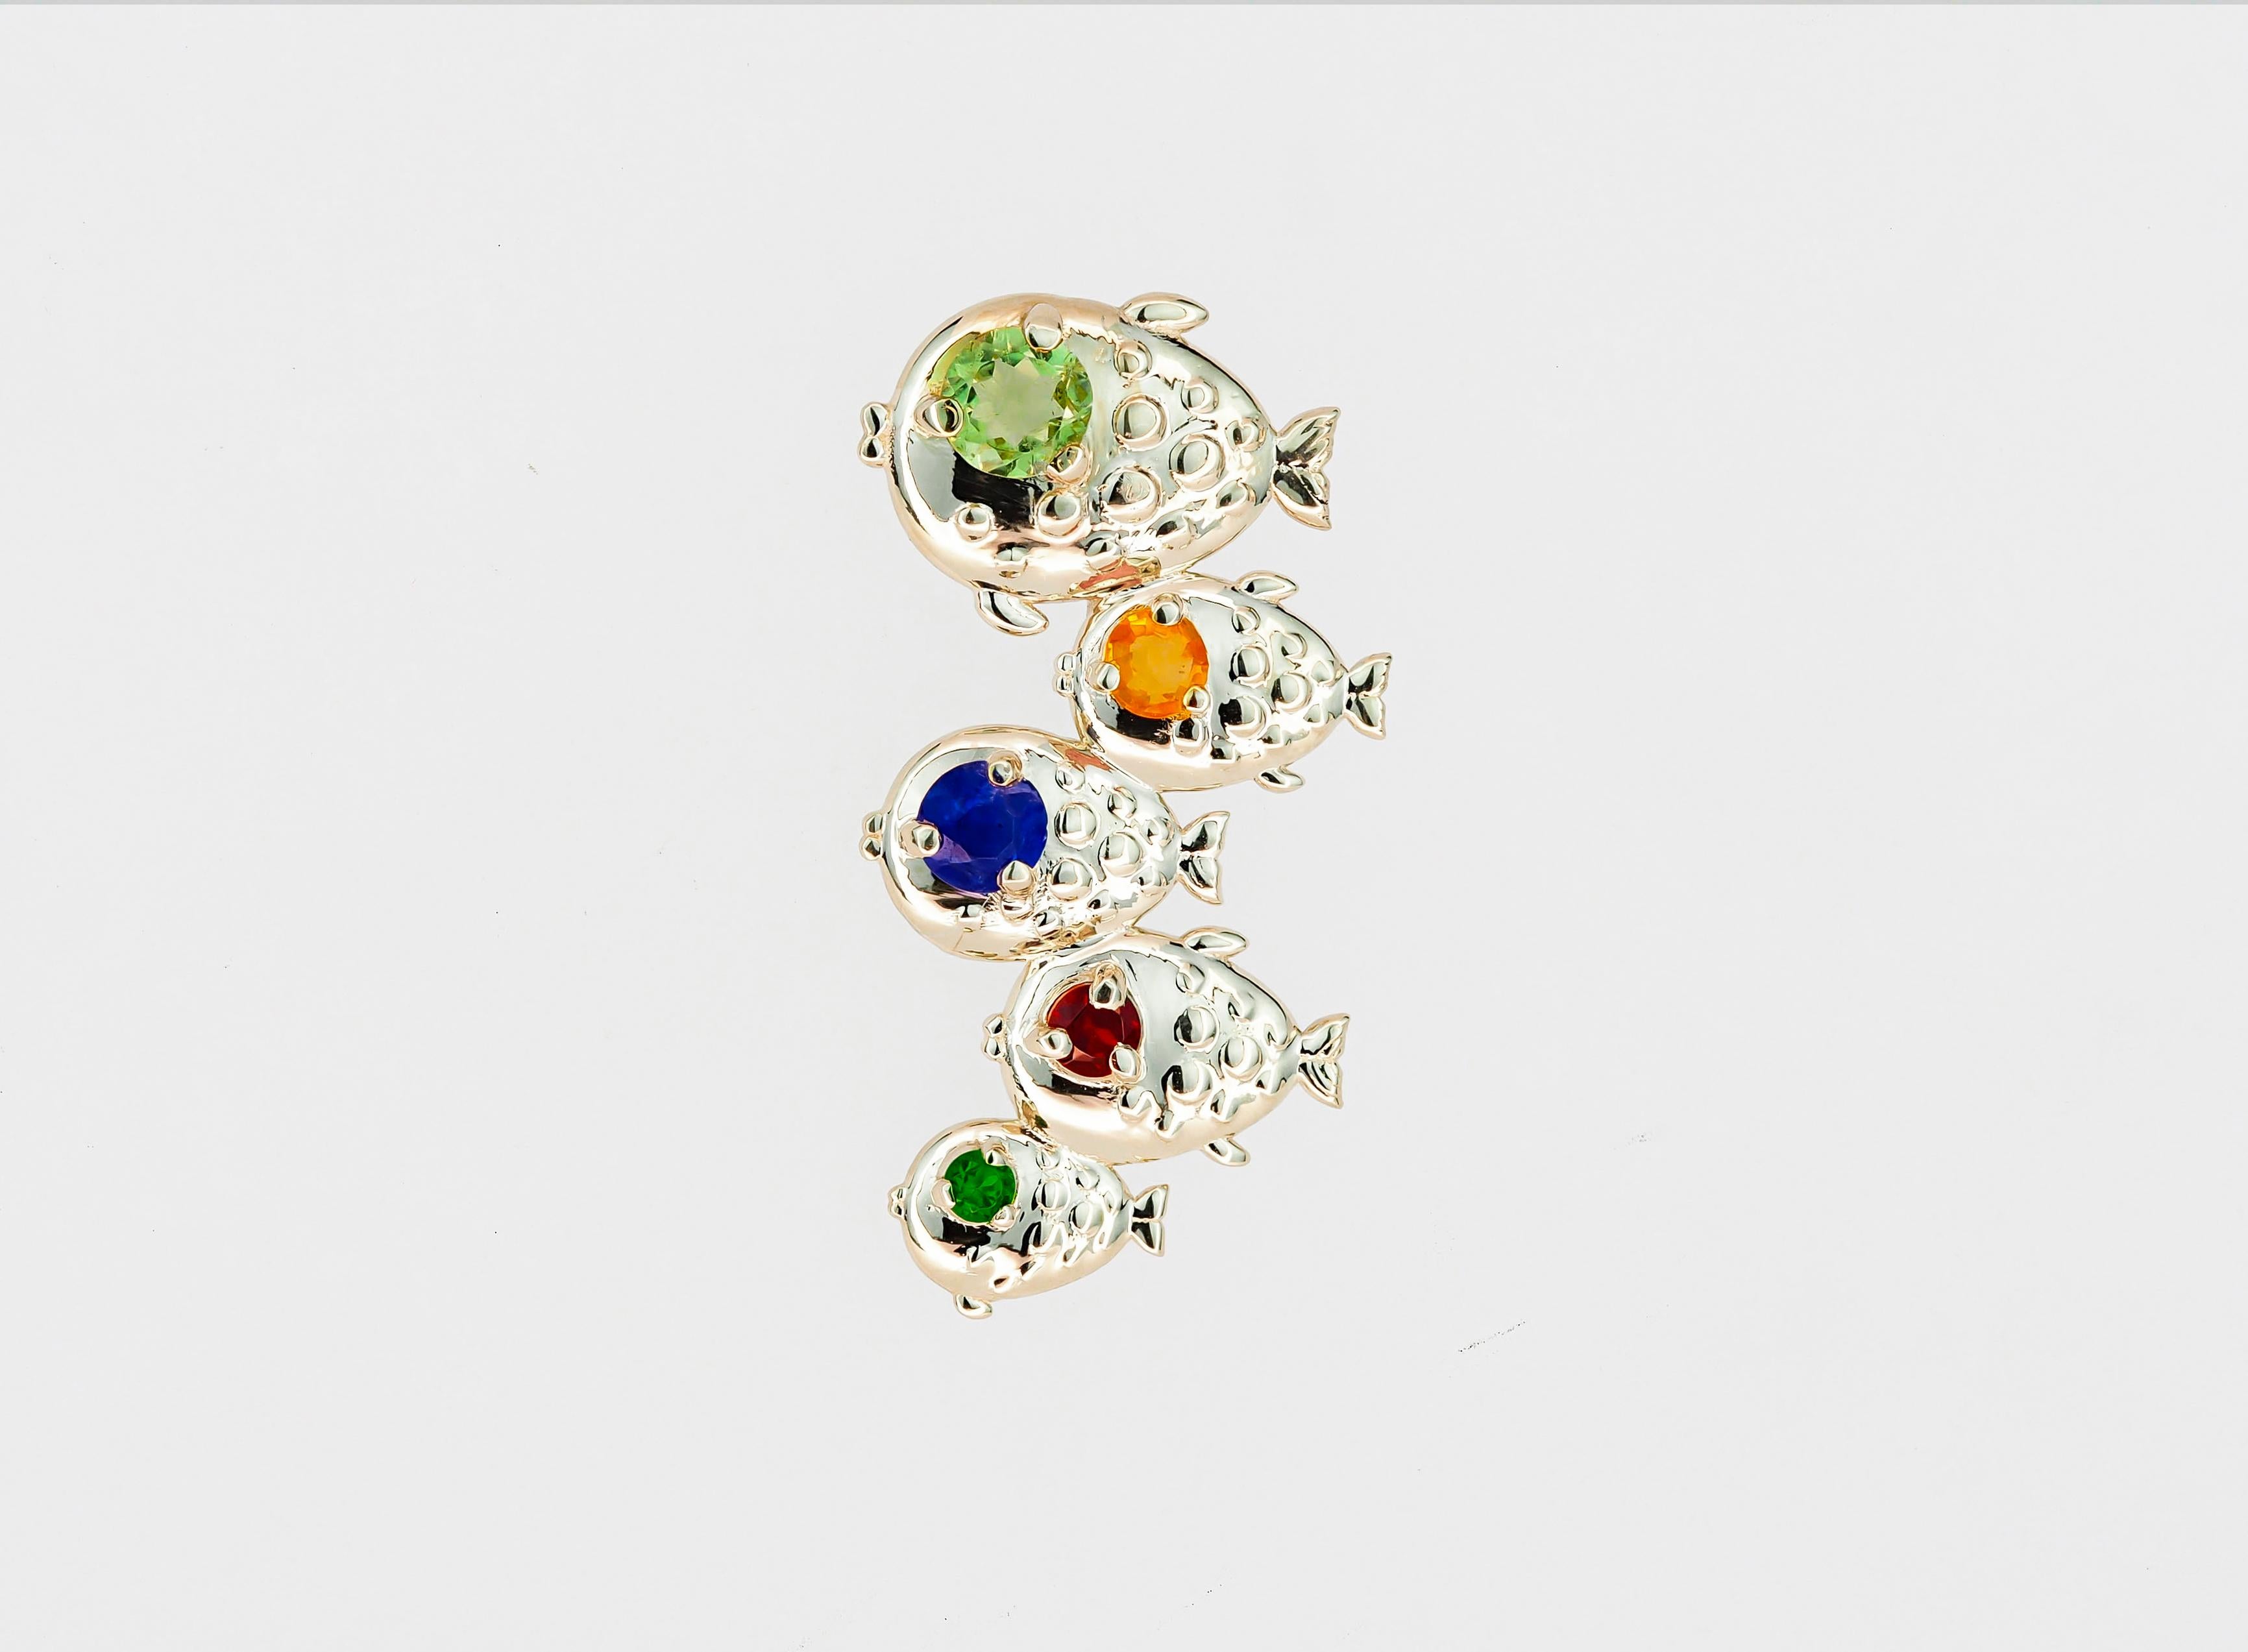 Women's School of Fish Pendant with Tourmaline, Sapphires, Chrome Diopside and Garnet For Sale